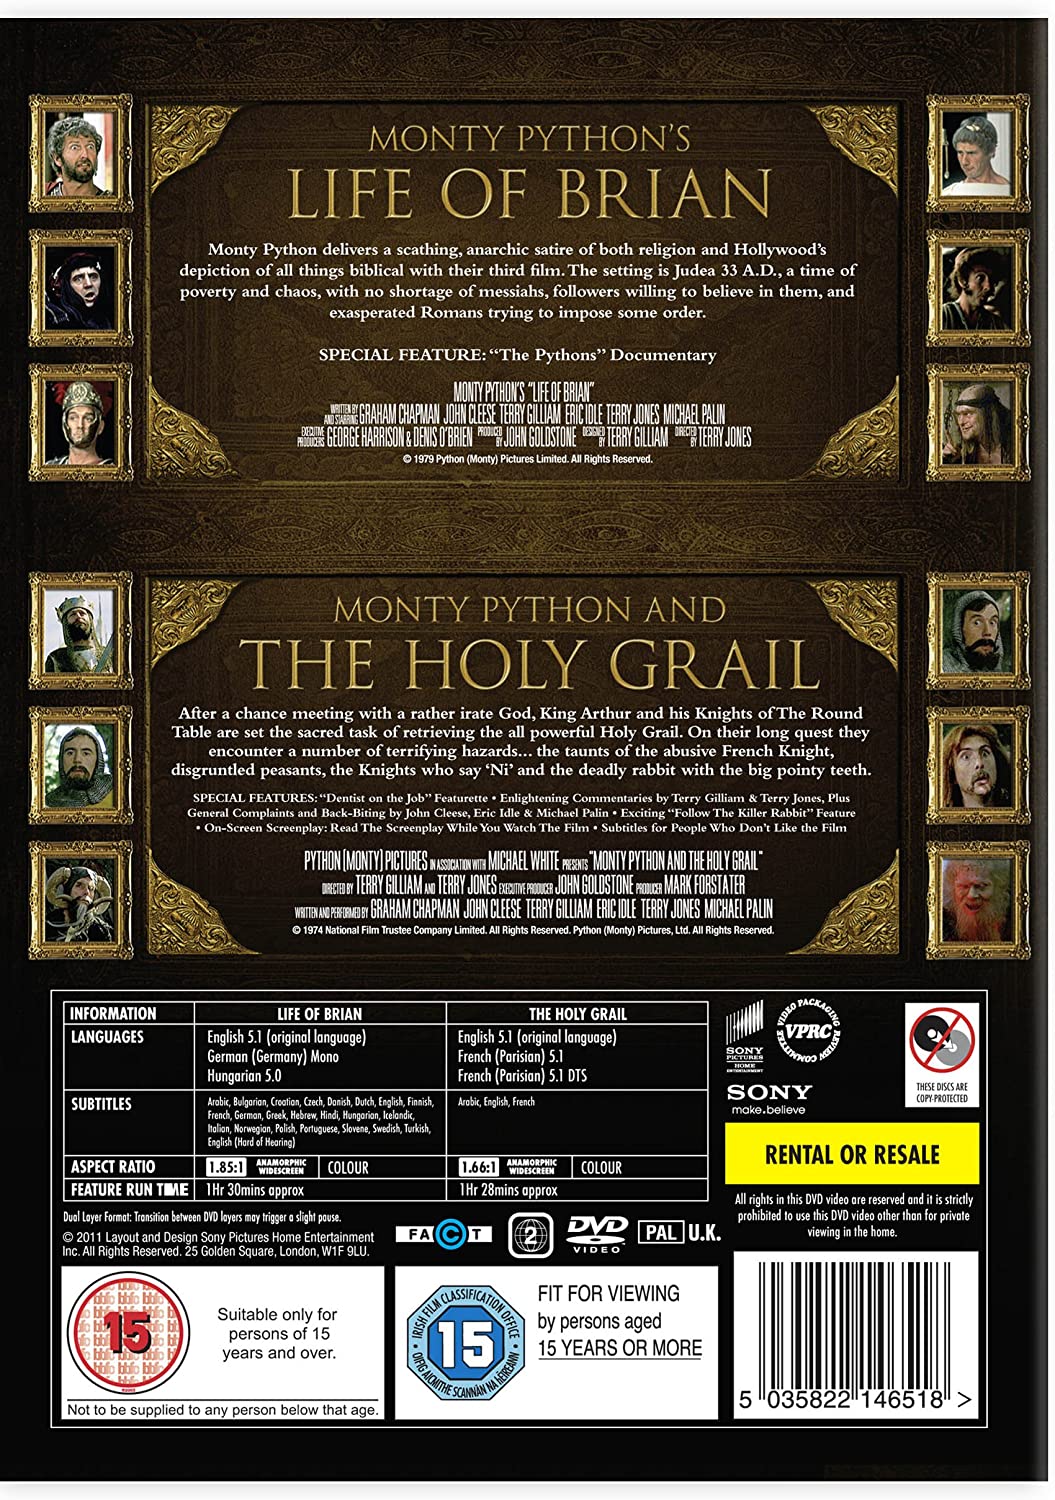 The Life of Brian / Monty Python and the Holy Grail [DVD]